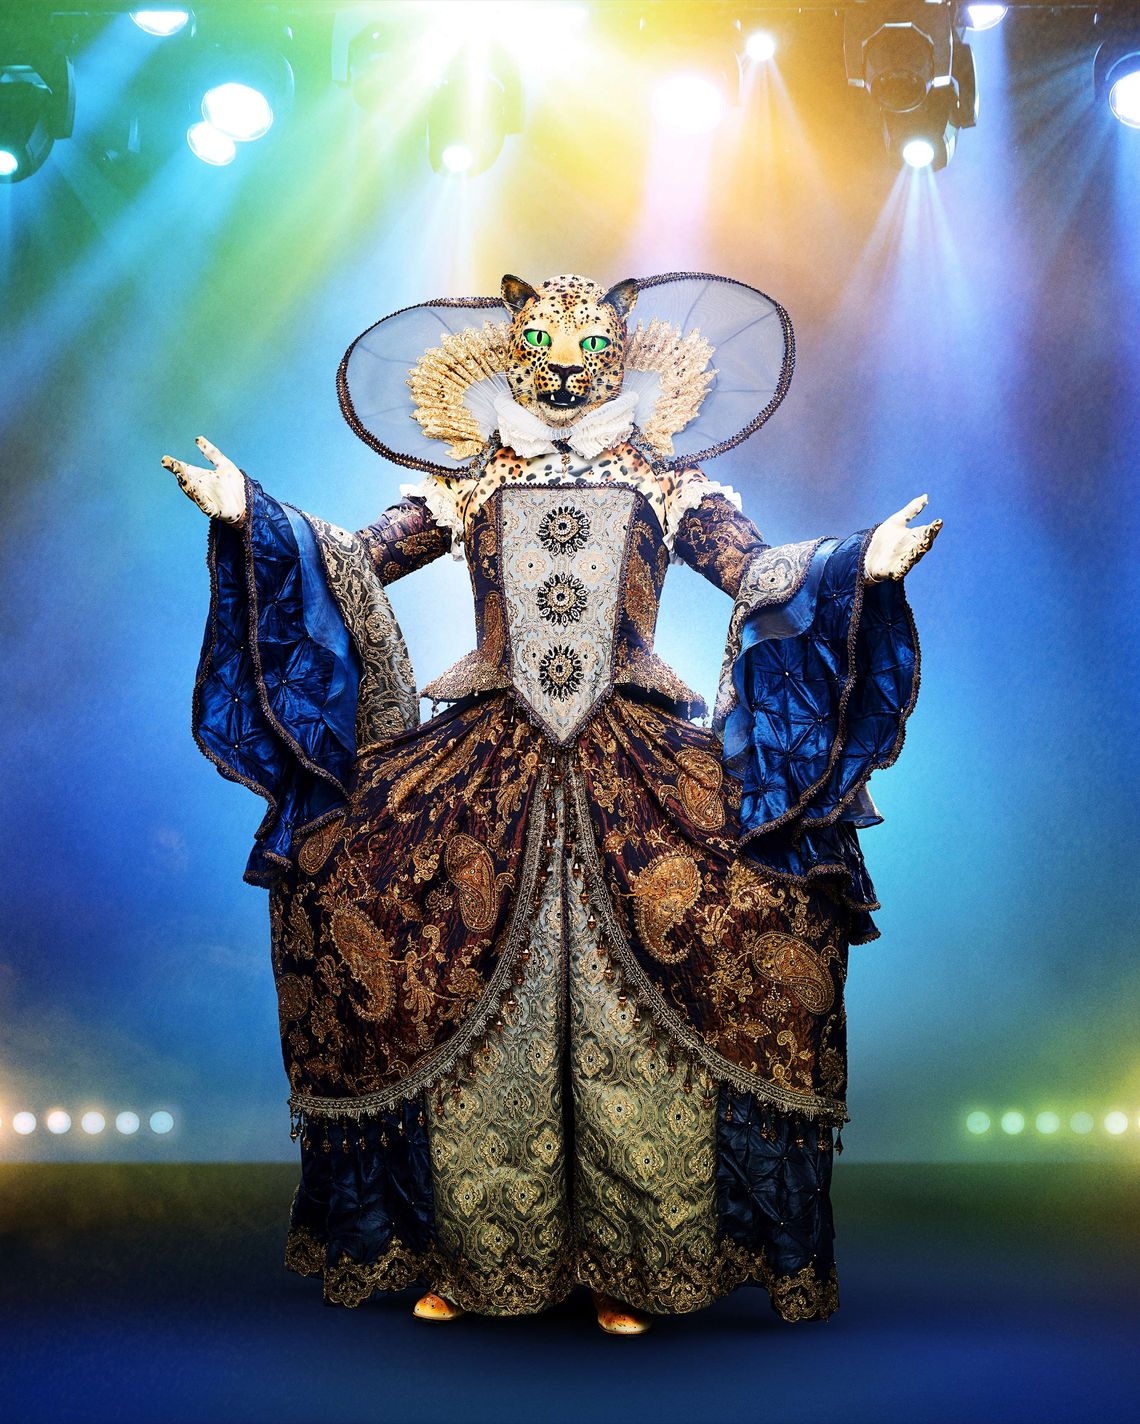 The Masked Singer Uk Season 2 Costumes : Masked Singer Uk Reveals New Costumes For Season 2 / Get an exclusive first look at three of the costumes featured in season 2 of fox's 'the masked singer.' job 1 (and 2, 3, and 4) for the masked singer costume designer marina toybina before season 2 was to make sure the performance outfits had more mobility and the masks were easier to.